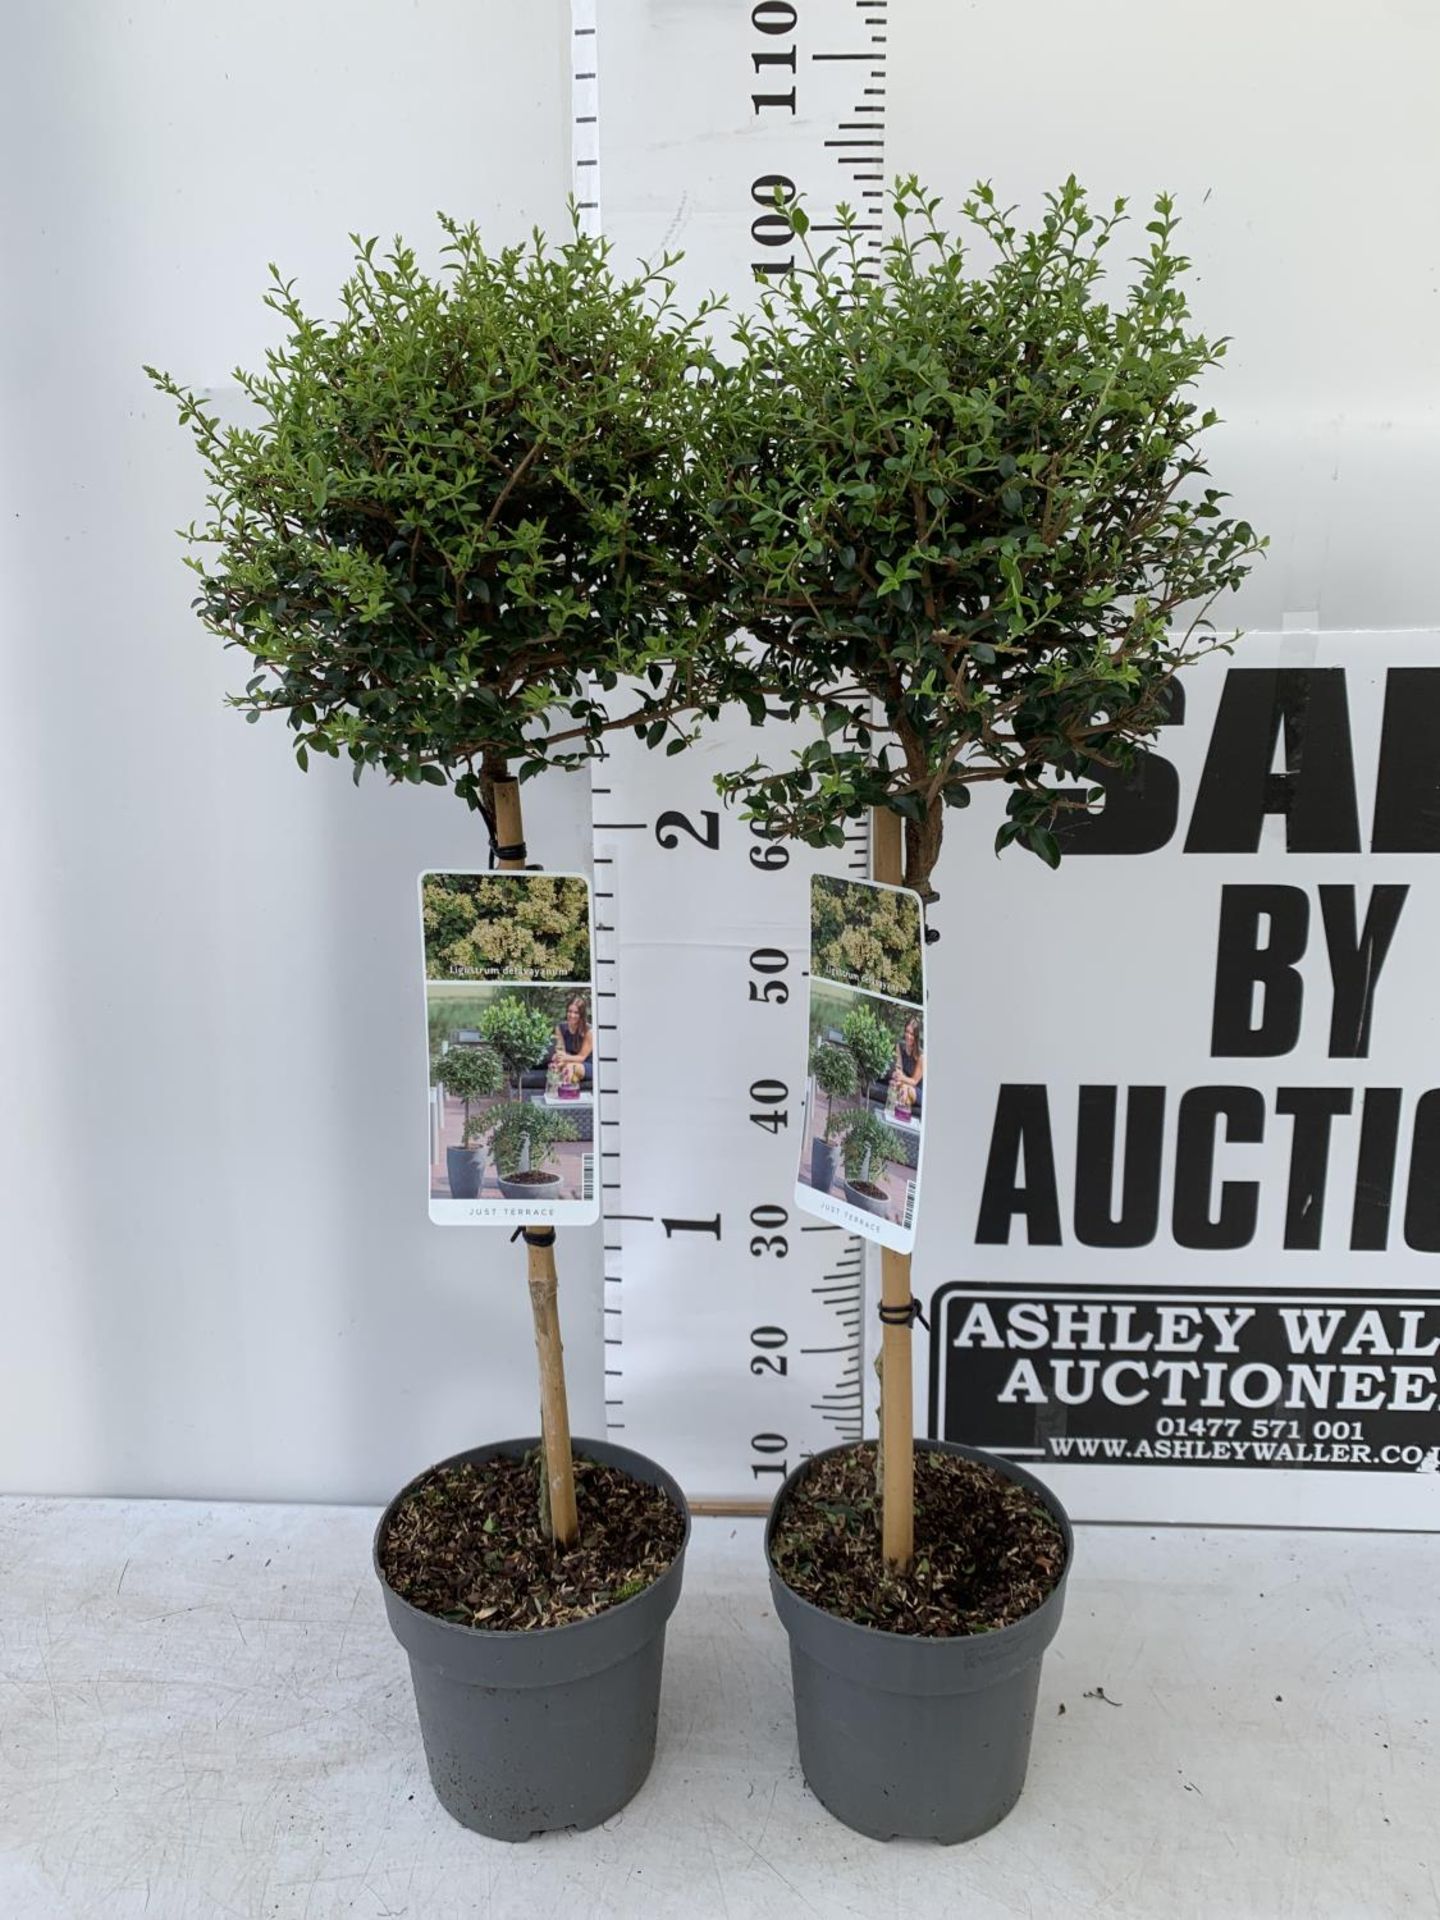 TWO LIGUSTRUM DELAVAYANUM STANDARD TREES APPROX 100CM IN HEIGHT IN 3LTR POTS PLUS VAT TO BE SOLD FOR